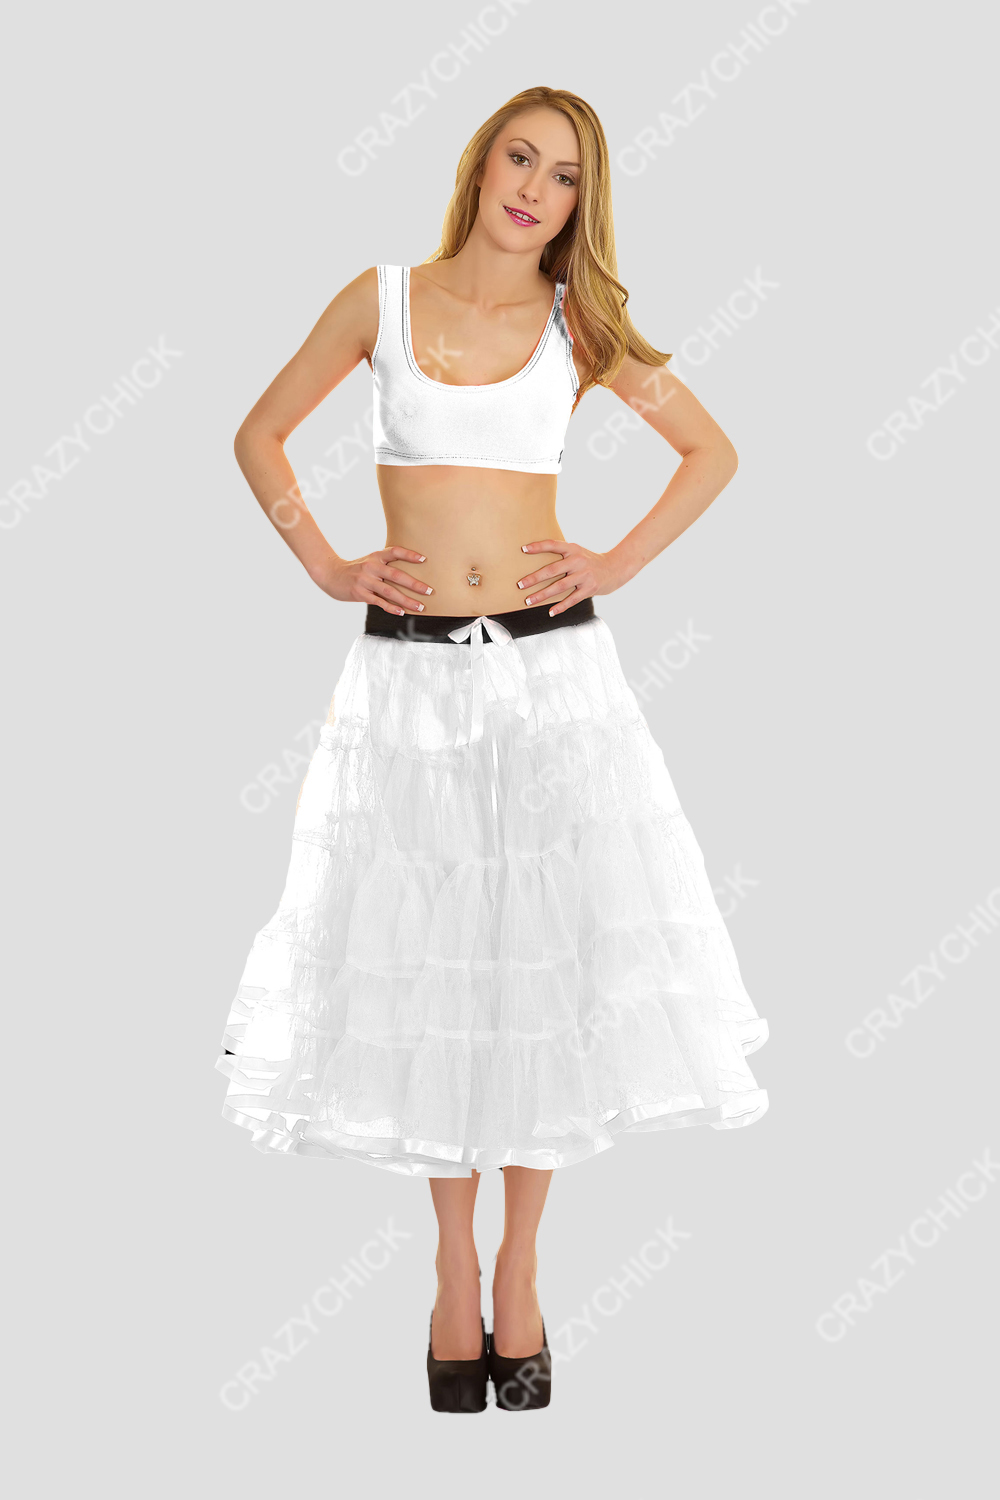 Crazy Chick Adult 5 Tier Petticoat with Ribbon White Tutu Skirt (Approximately 26 Inches Long)